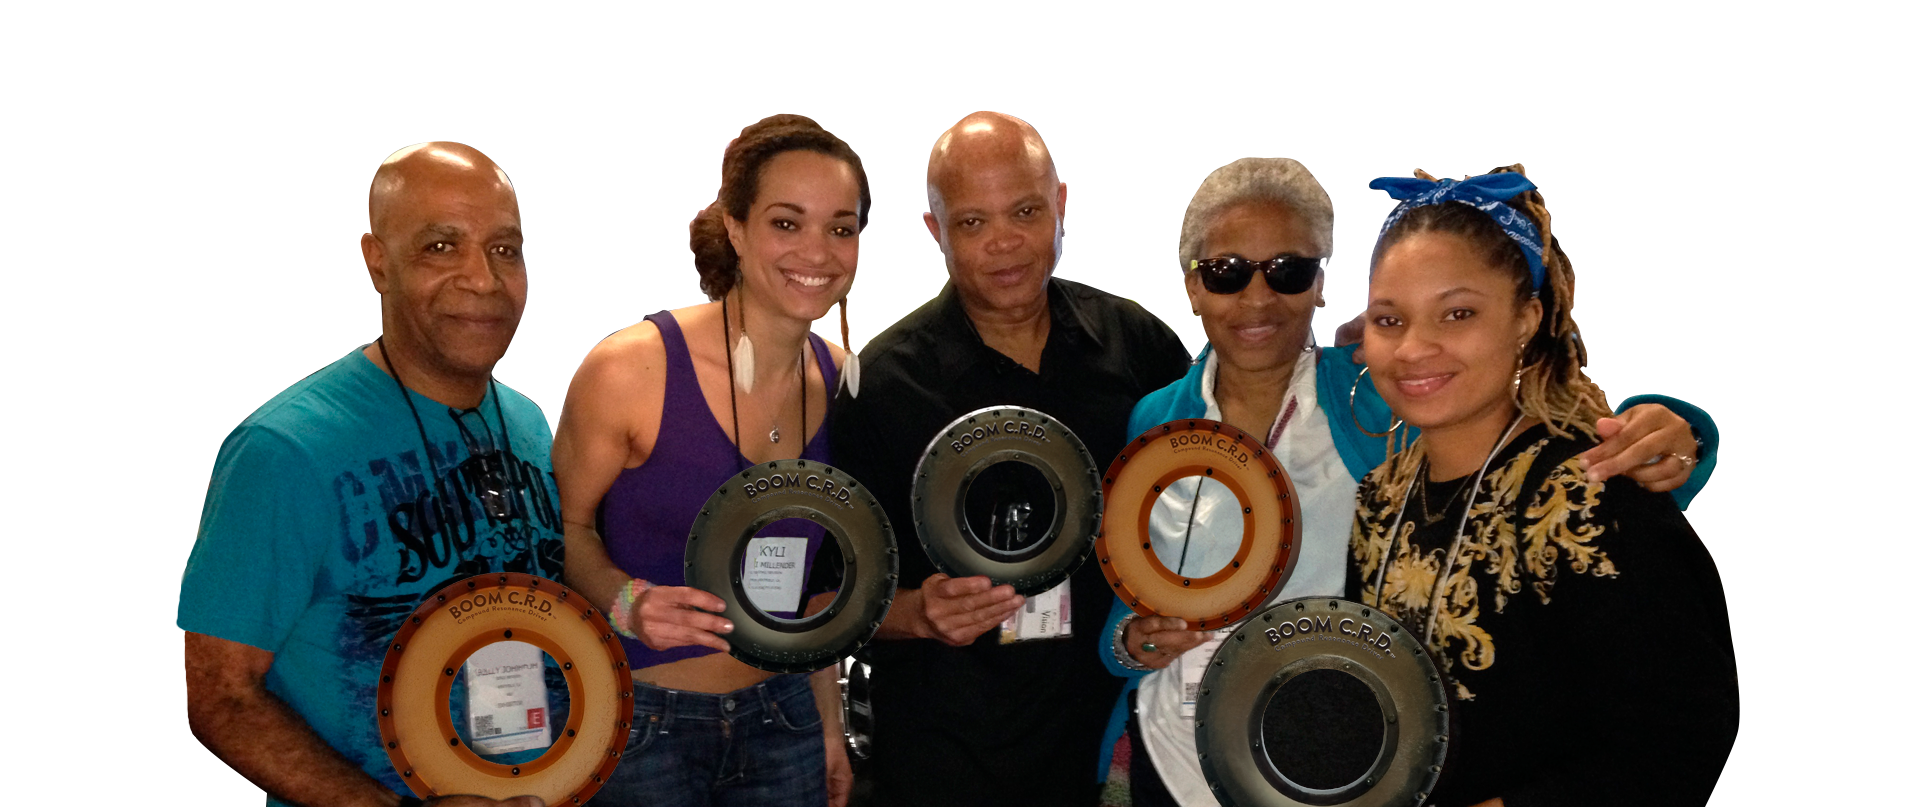 Sam Millender, BOOM CRD Inventor (middle) and Billy Johnson, drummer, (left) along with others holding BOOM CRD Devices